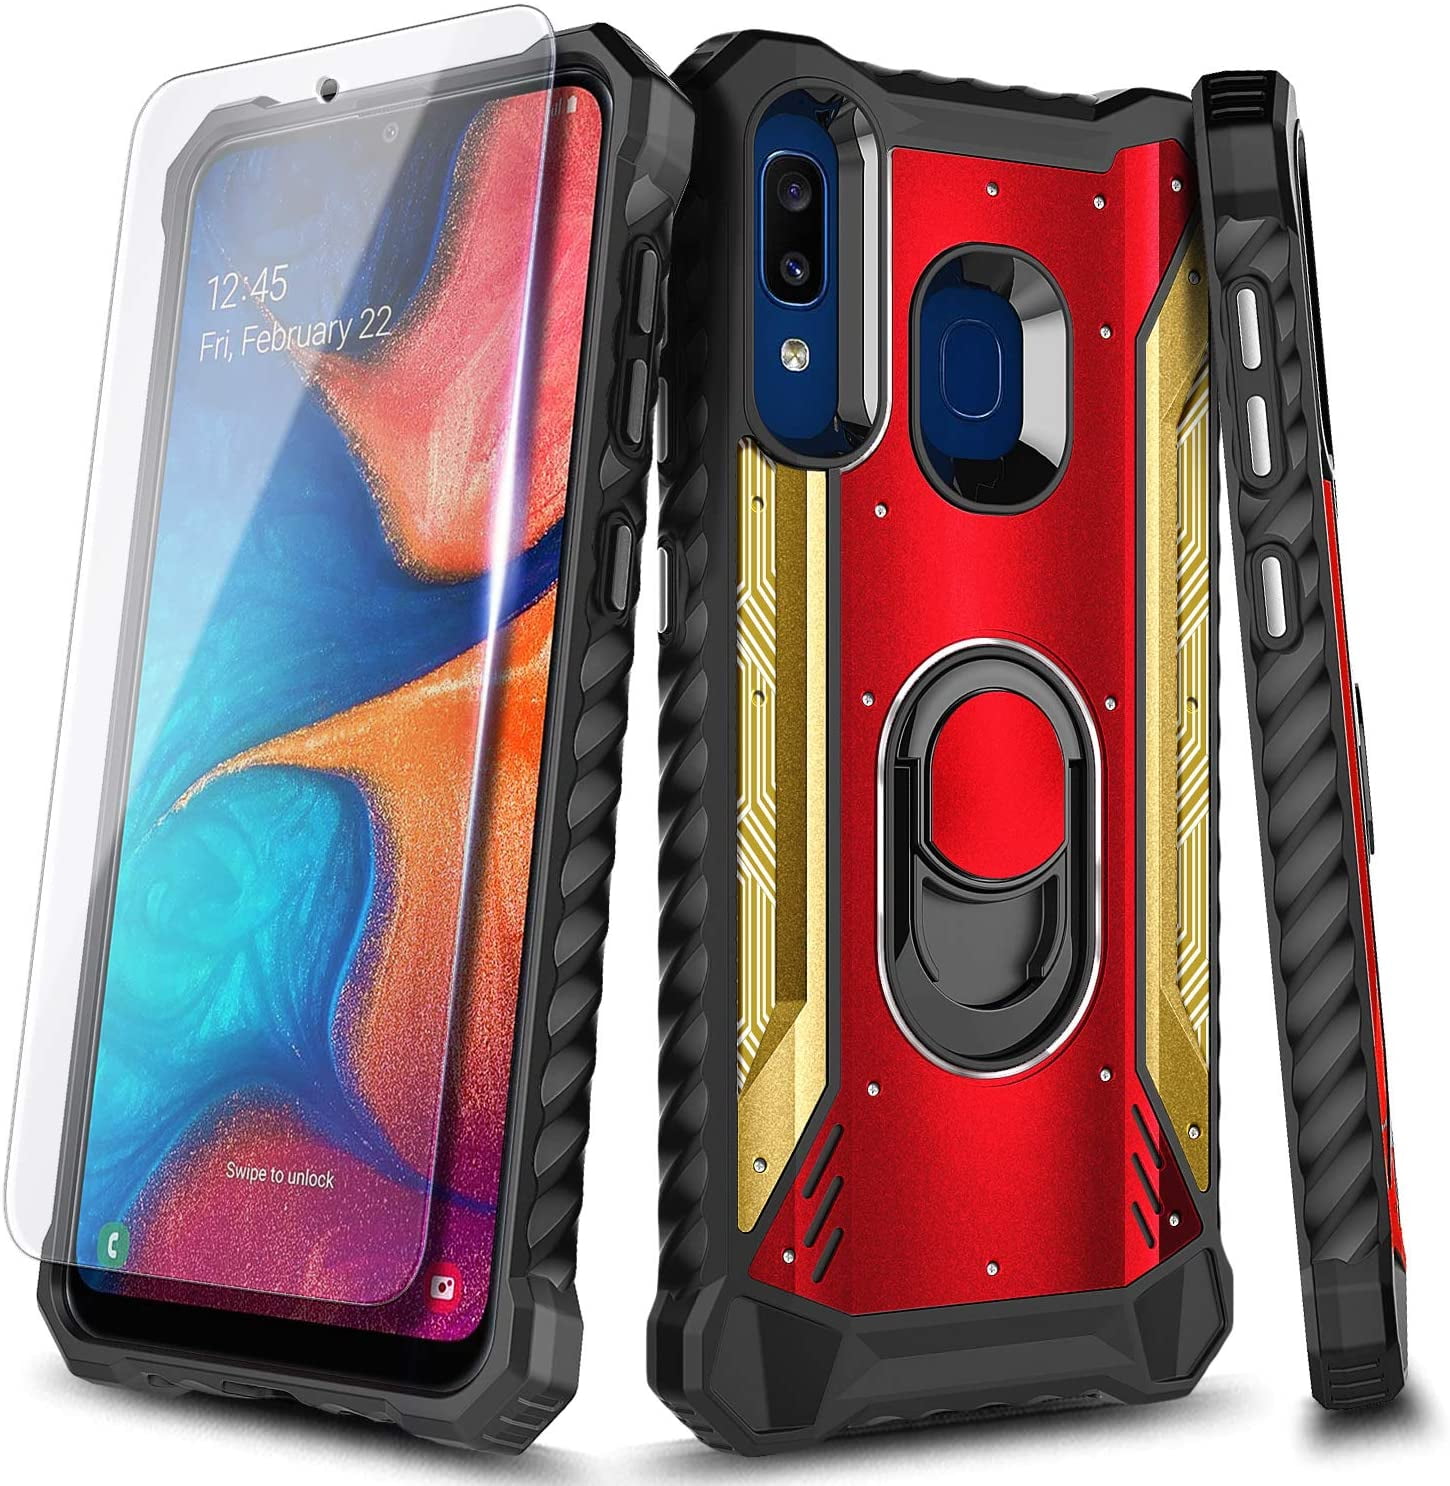 NageBee Case for Samsung Galaxy A50 2019 Ultra Slim Thin Glossy Stylish Protective Bumper Cover Phone Case -Nova with Tempered Glass Screen Protector 